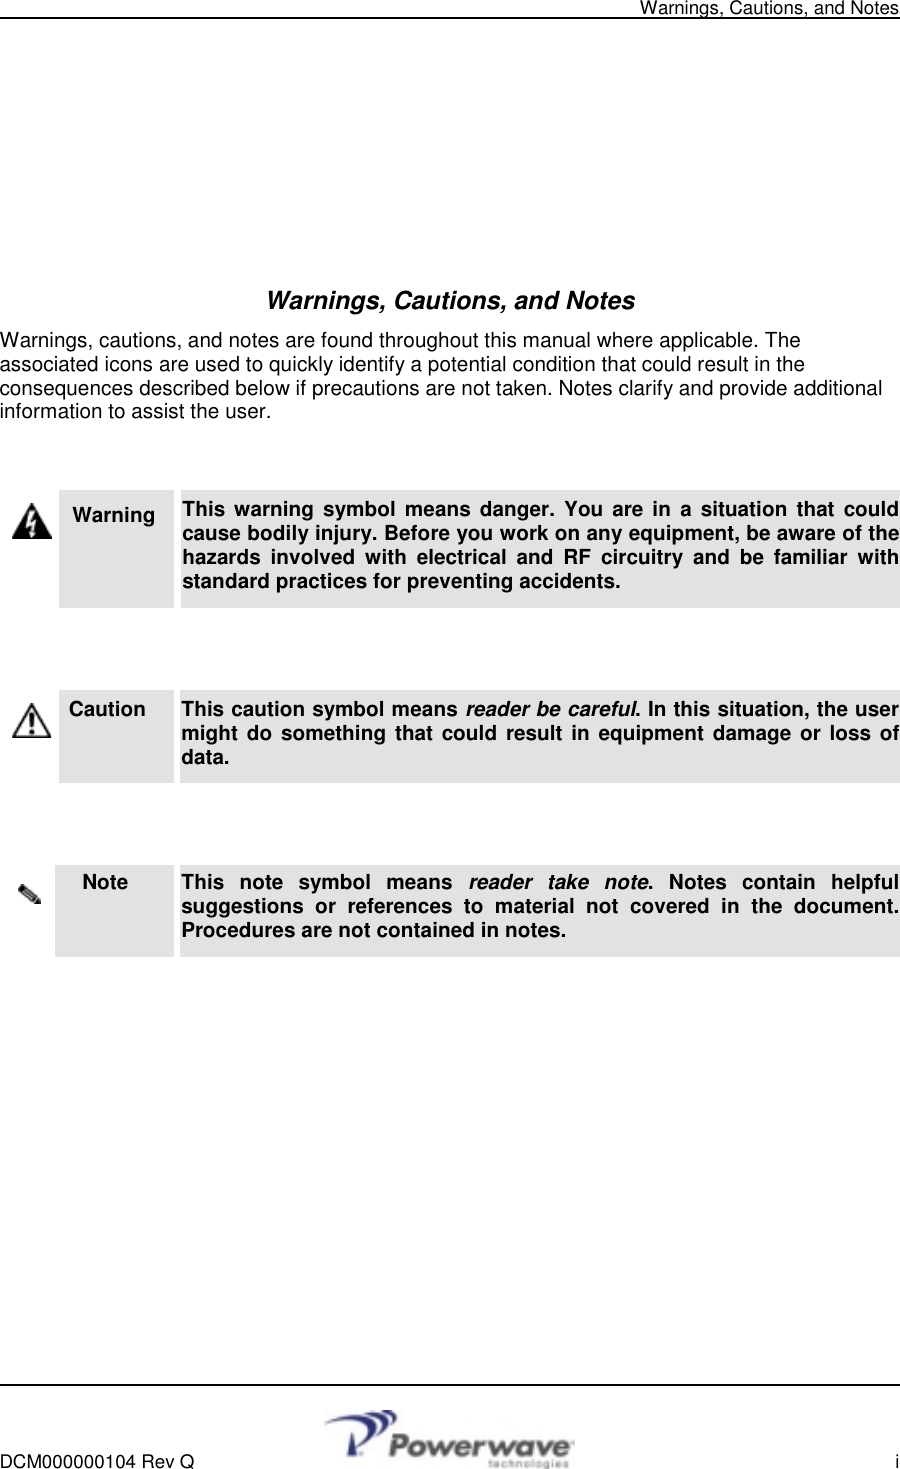   Warnings, Cautions, and Notes    DCM000000104 Rev Q    i         Warnings, Cautions, and Notes Warnings, cautions, and notes are found throughout this manual where applicable. The associated icons are used to quickly identify a potential condition that could result in the consequences described below if precautions are not taken. Notes clarify and provide additional information to assist the user.   Warning   This warning symbol means danger. You are in a situation that could cause bodily injury. Before you work on any equipment, be aware of the hazards involved with electrical and RF circuitry and be familiar with standard practices for preventing accidents.   Caution     This caution symbol means reader be careful. In this situation, the user might do something that could result in equipment damage or loss of data.   Note     This note symbol means reader take note. Notes contain helpful suggestions or references to material not covered in the document. Procedures are not contained in notes.         